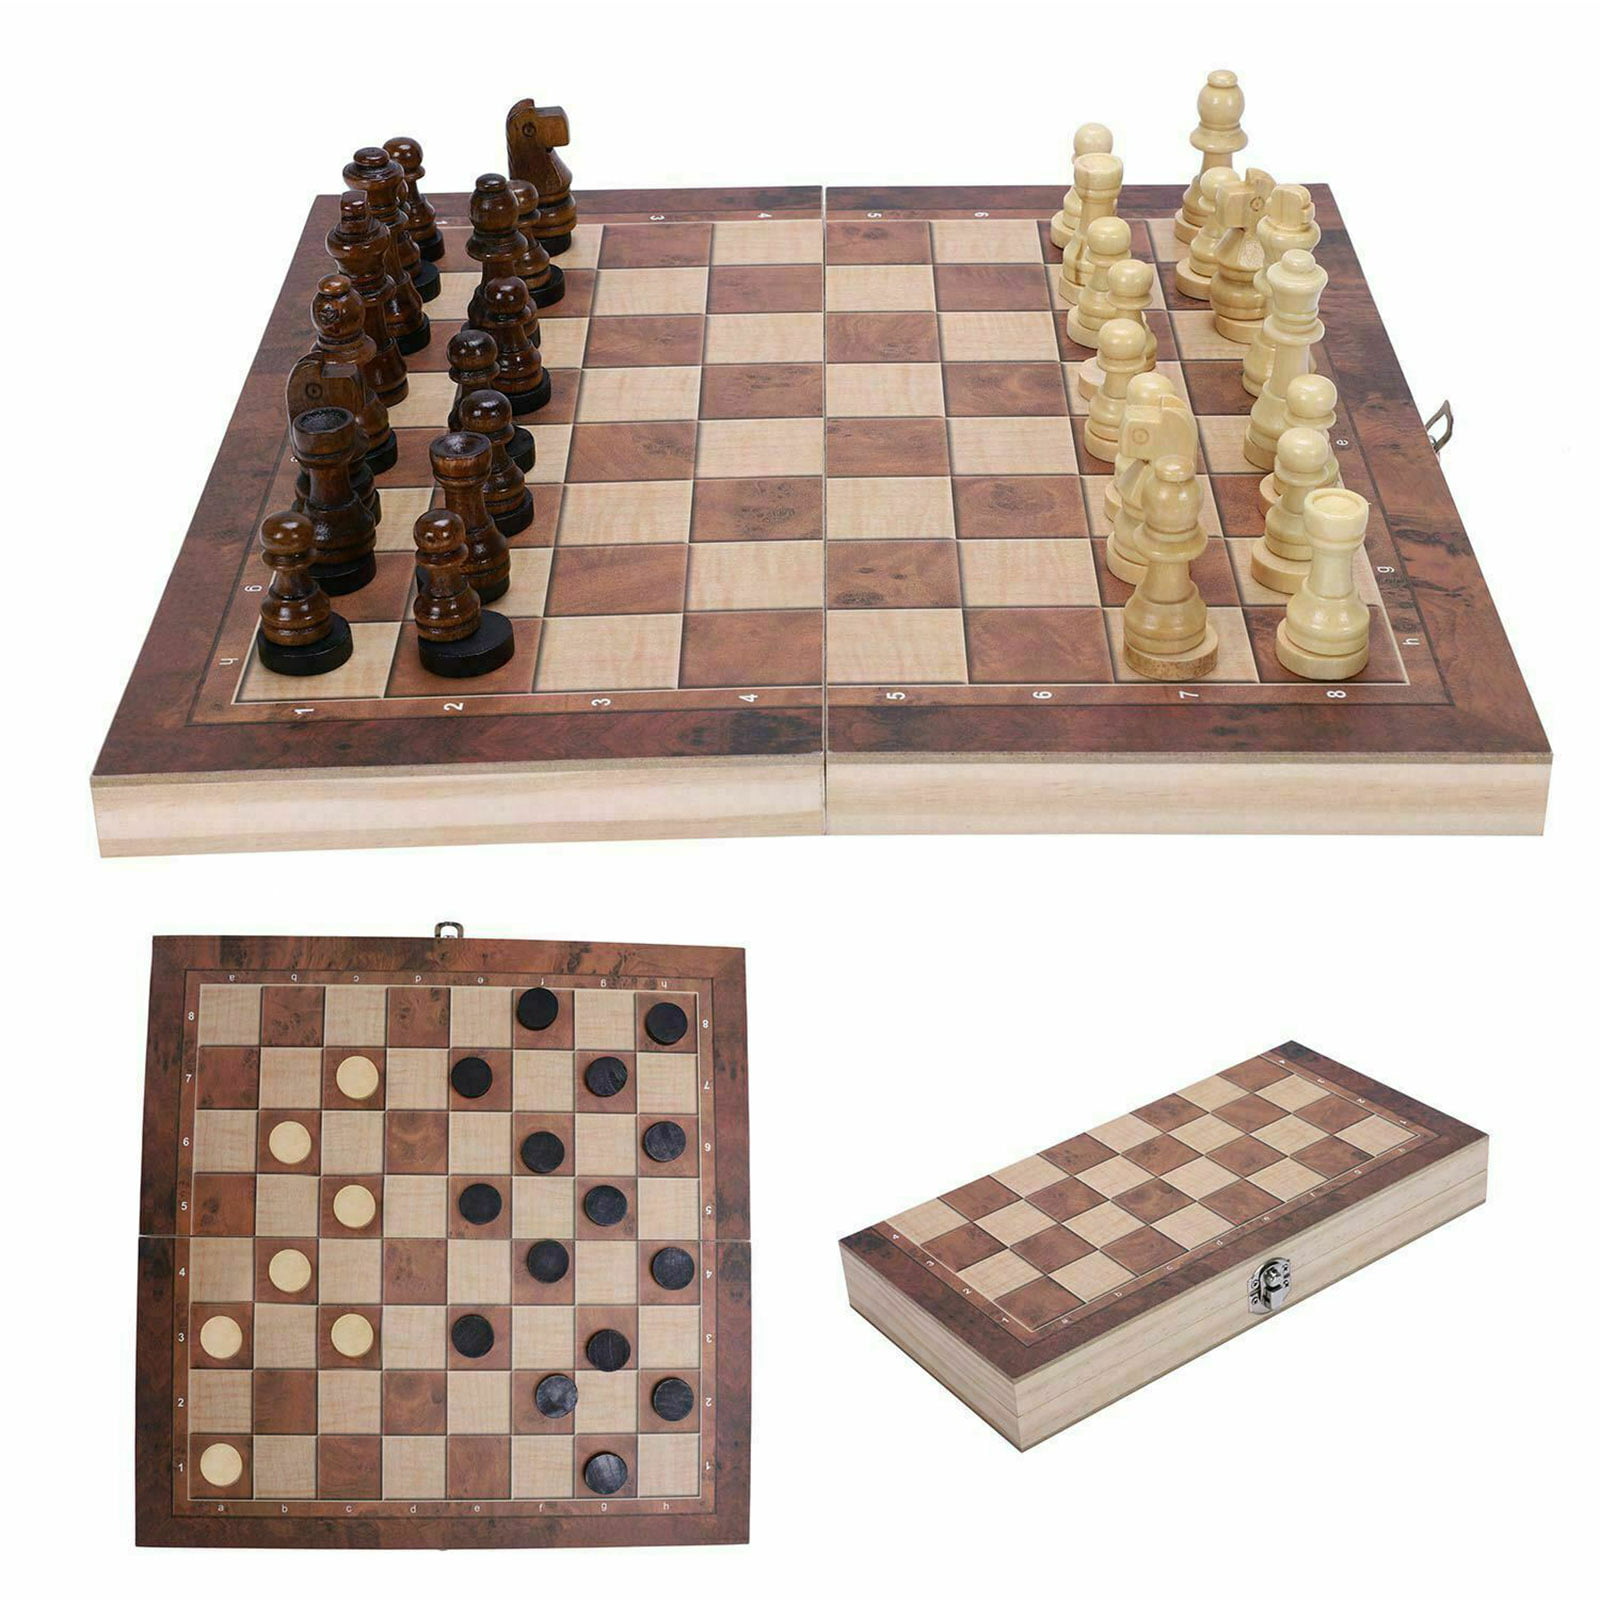 3in1 Chess Set with Folding Magnetic Chess Checkers Backgammon Draughts Gifts